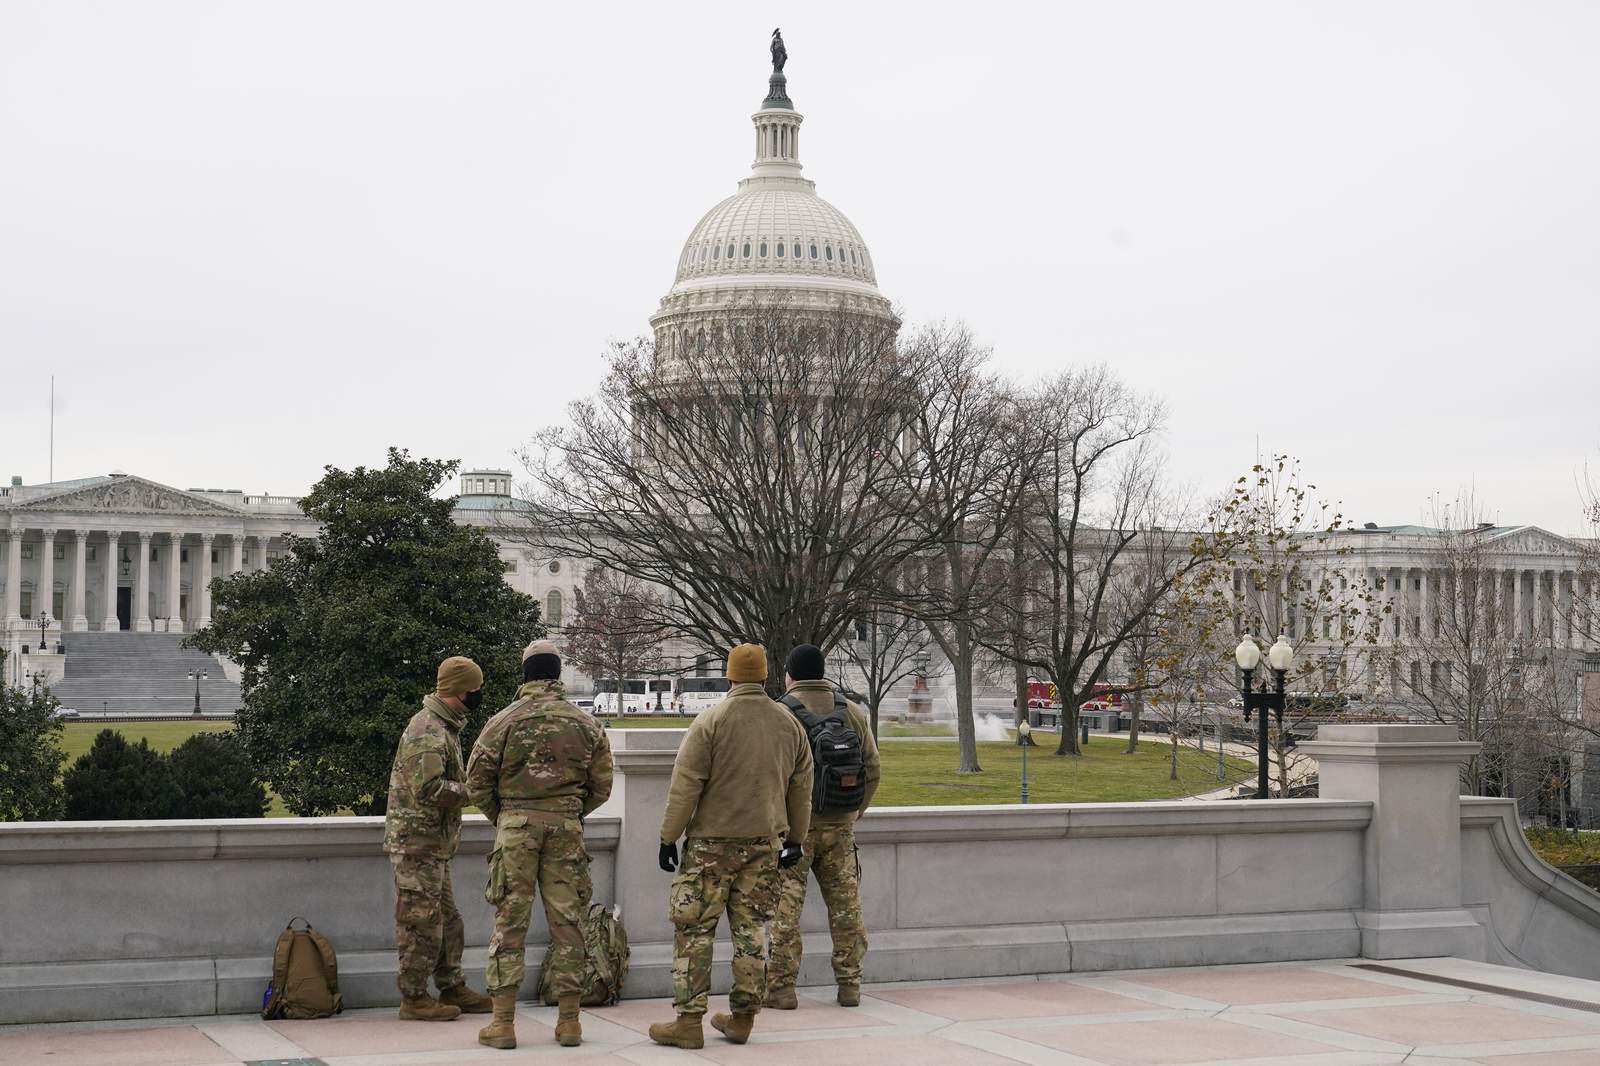 Army head says Nat. Guard may be allowed to carry guns in DC